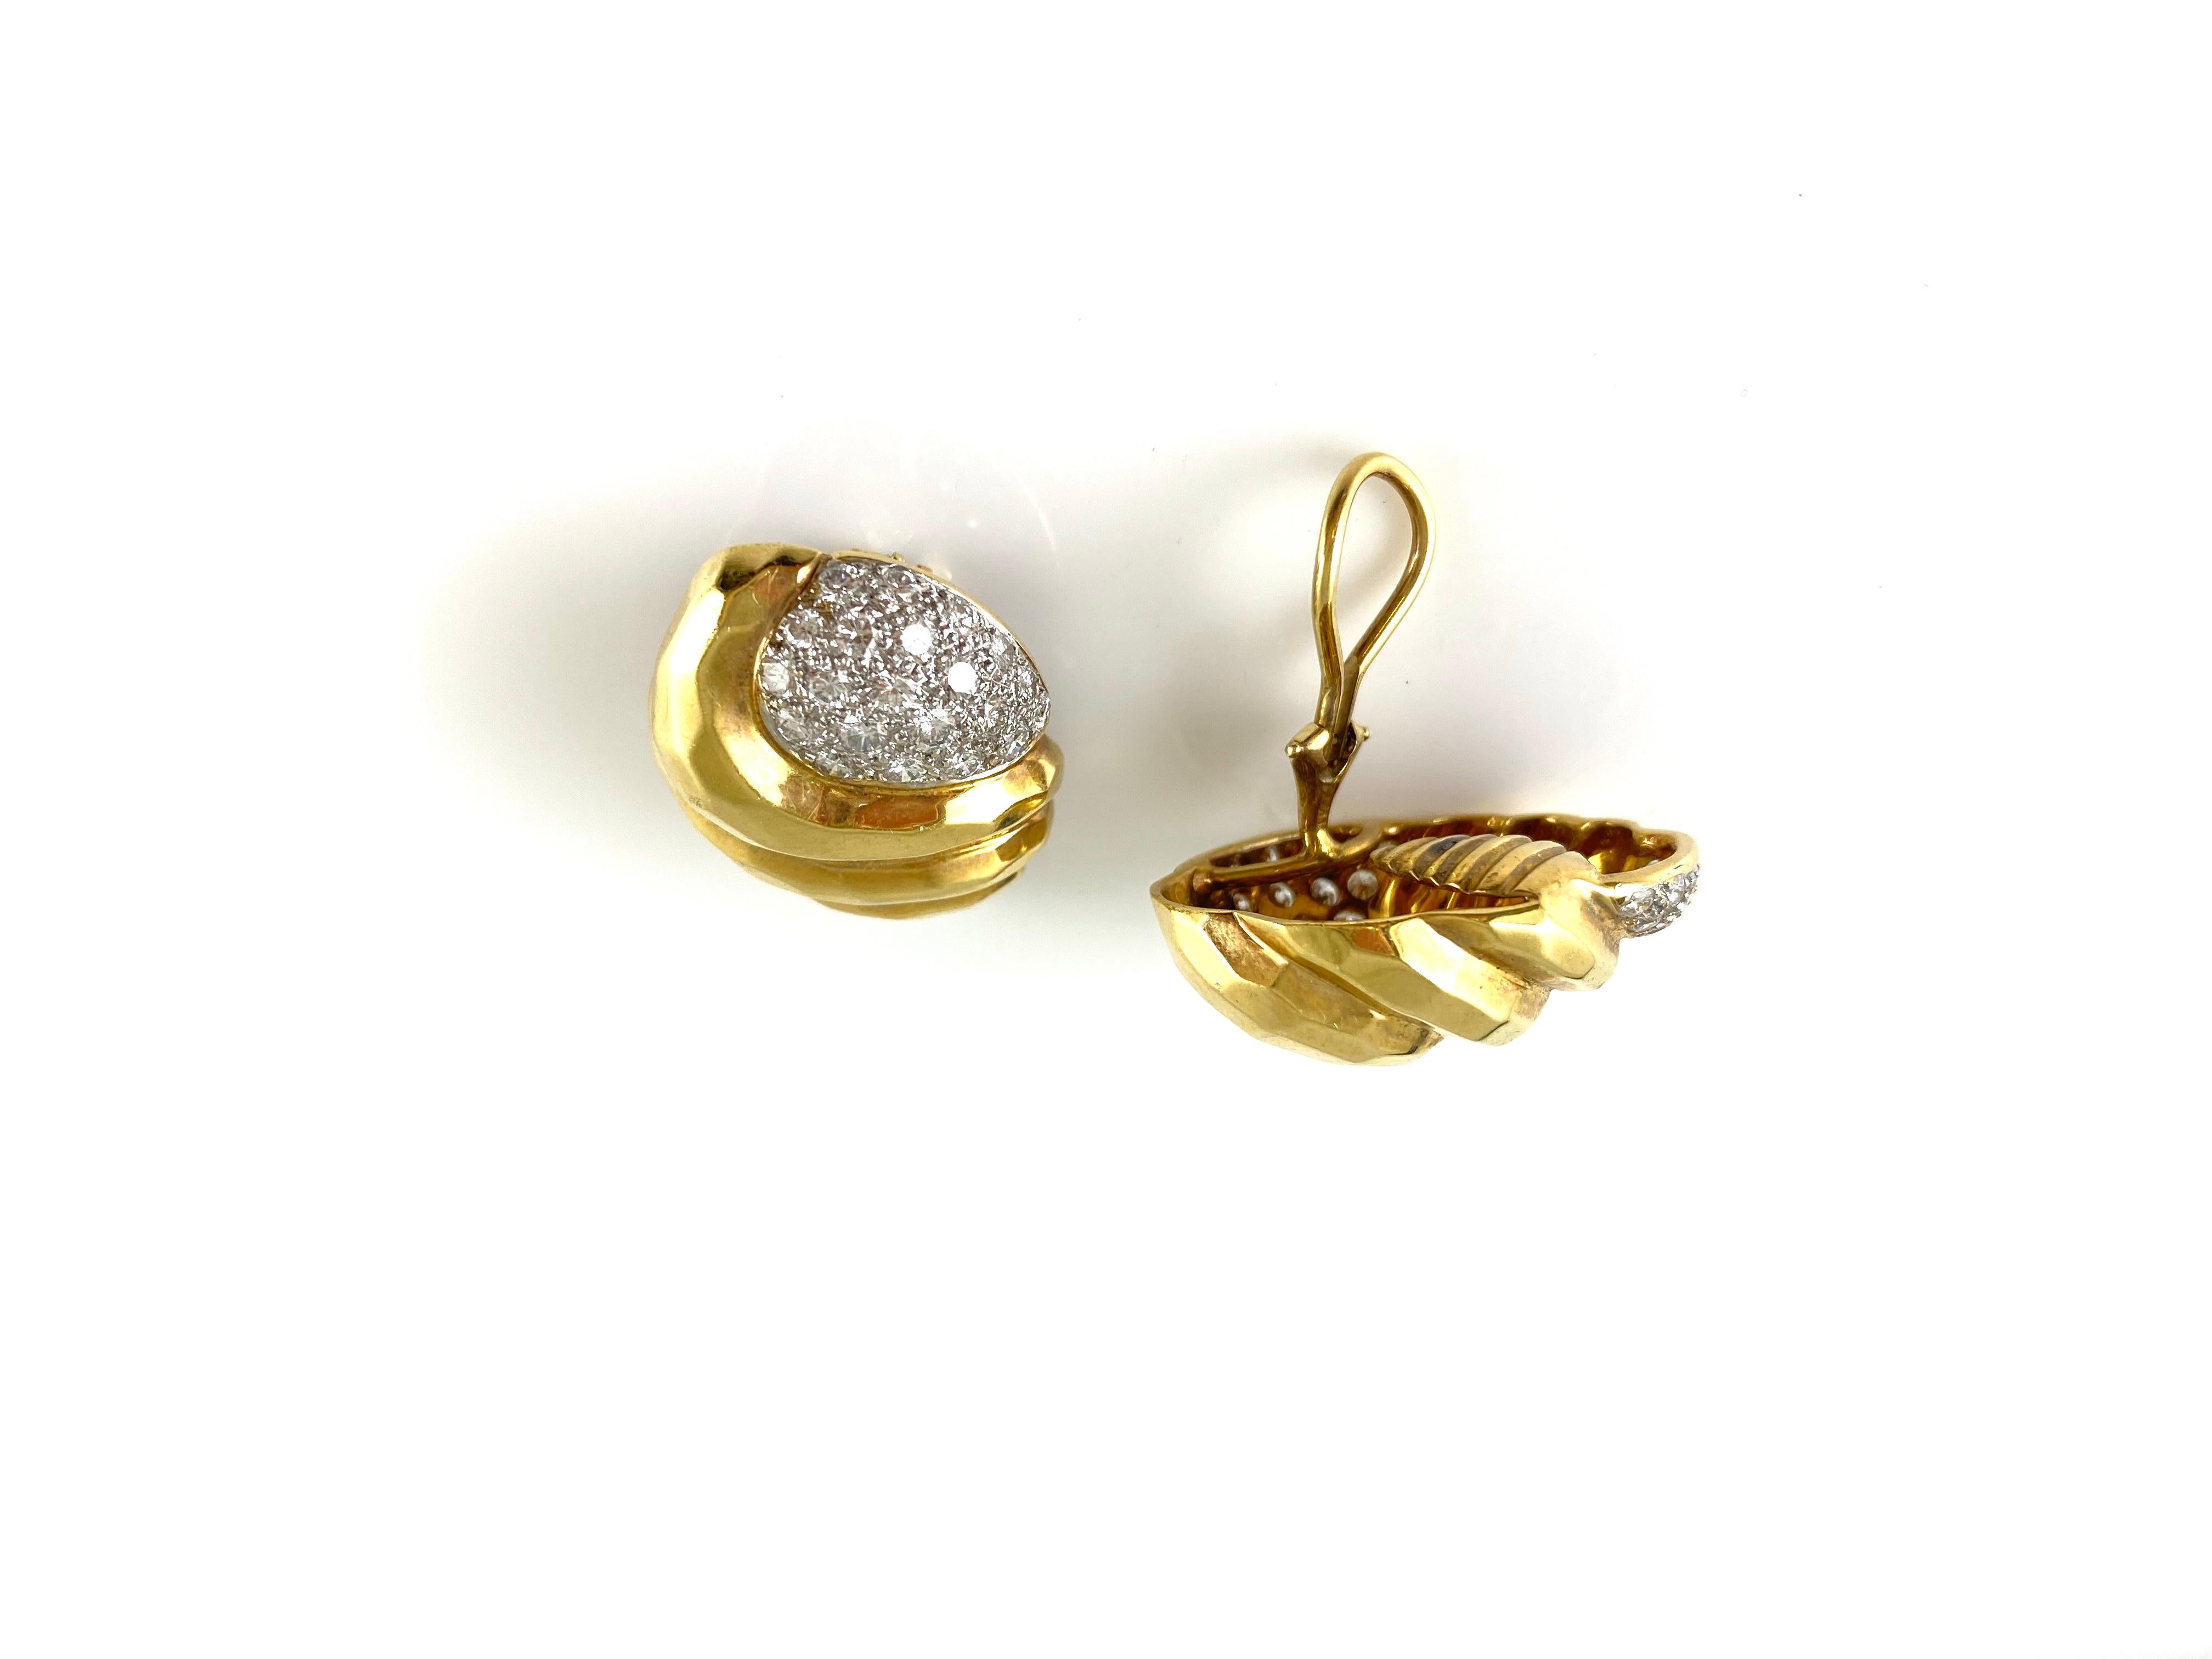 The earrings are finely crafted in 14k yellow gold with diamonds weighing approximately total of 2.00 carat.
Circa 1980.